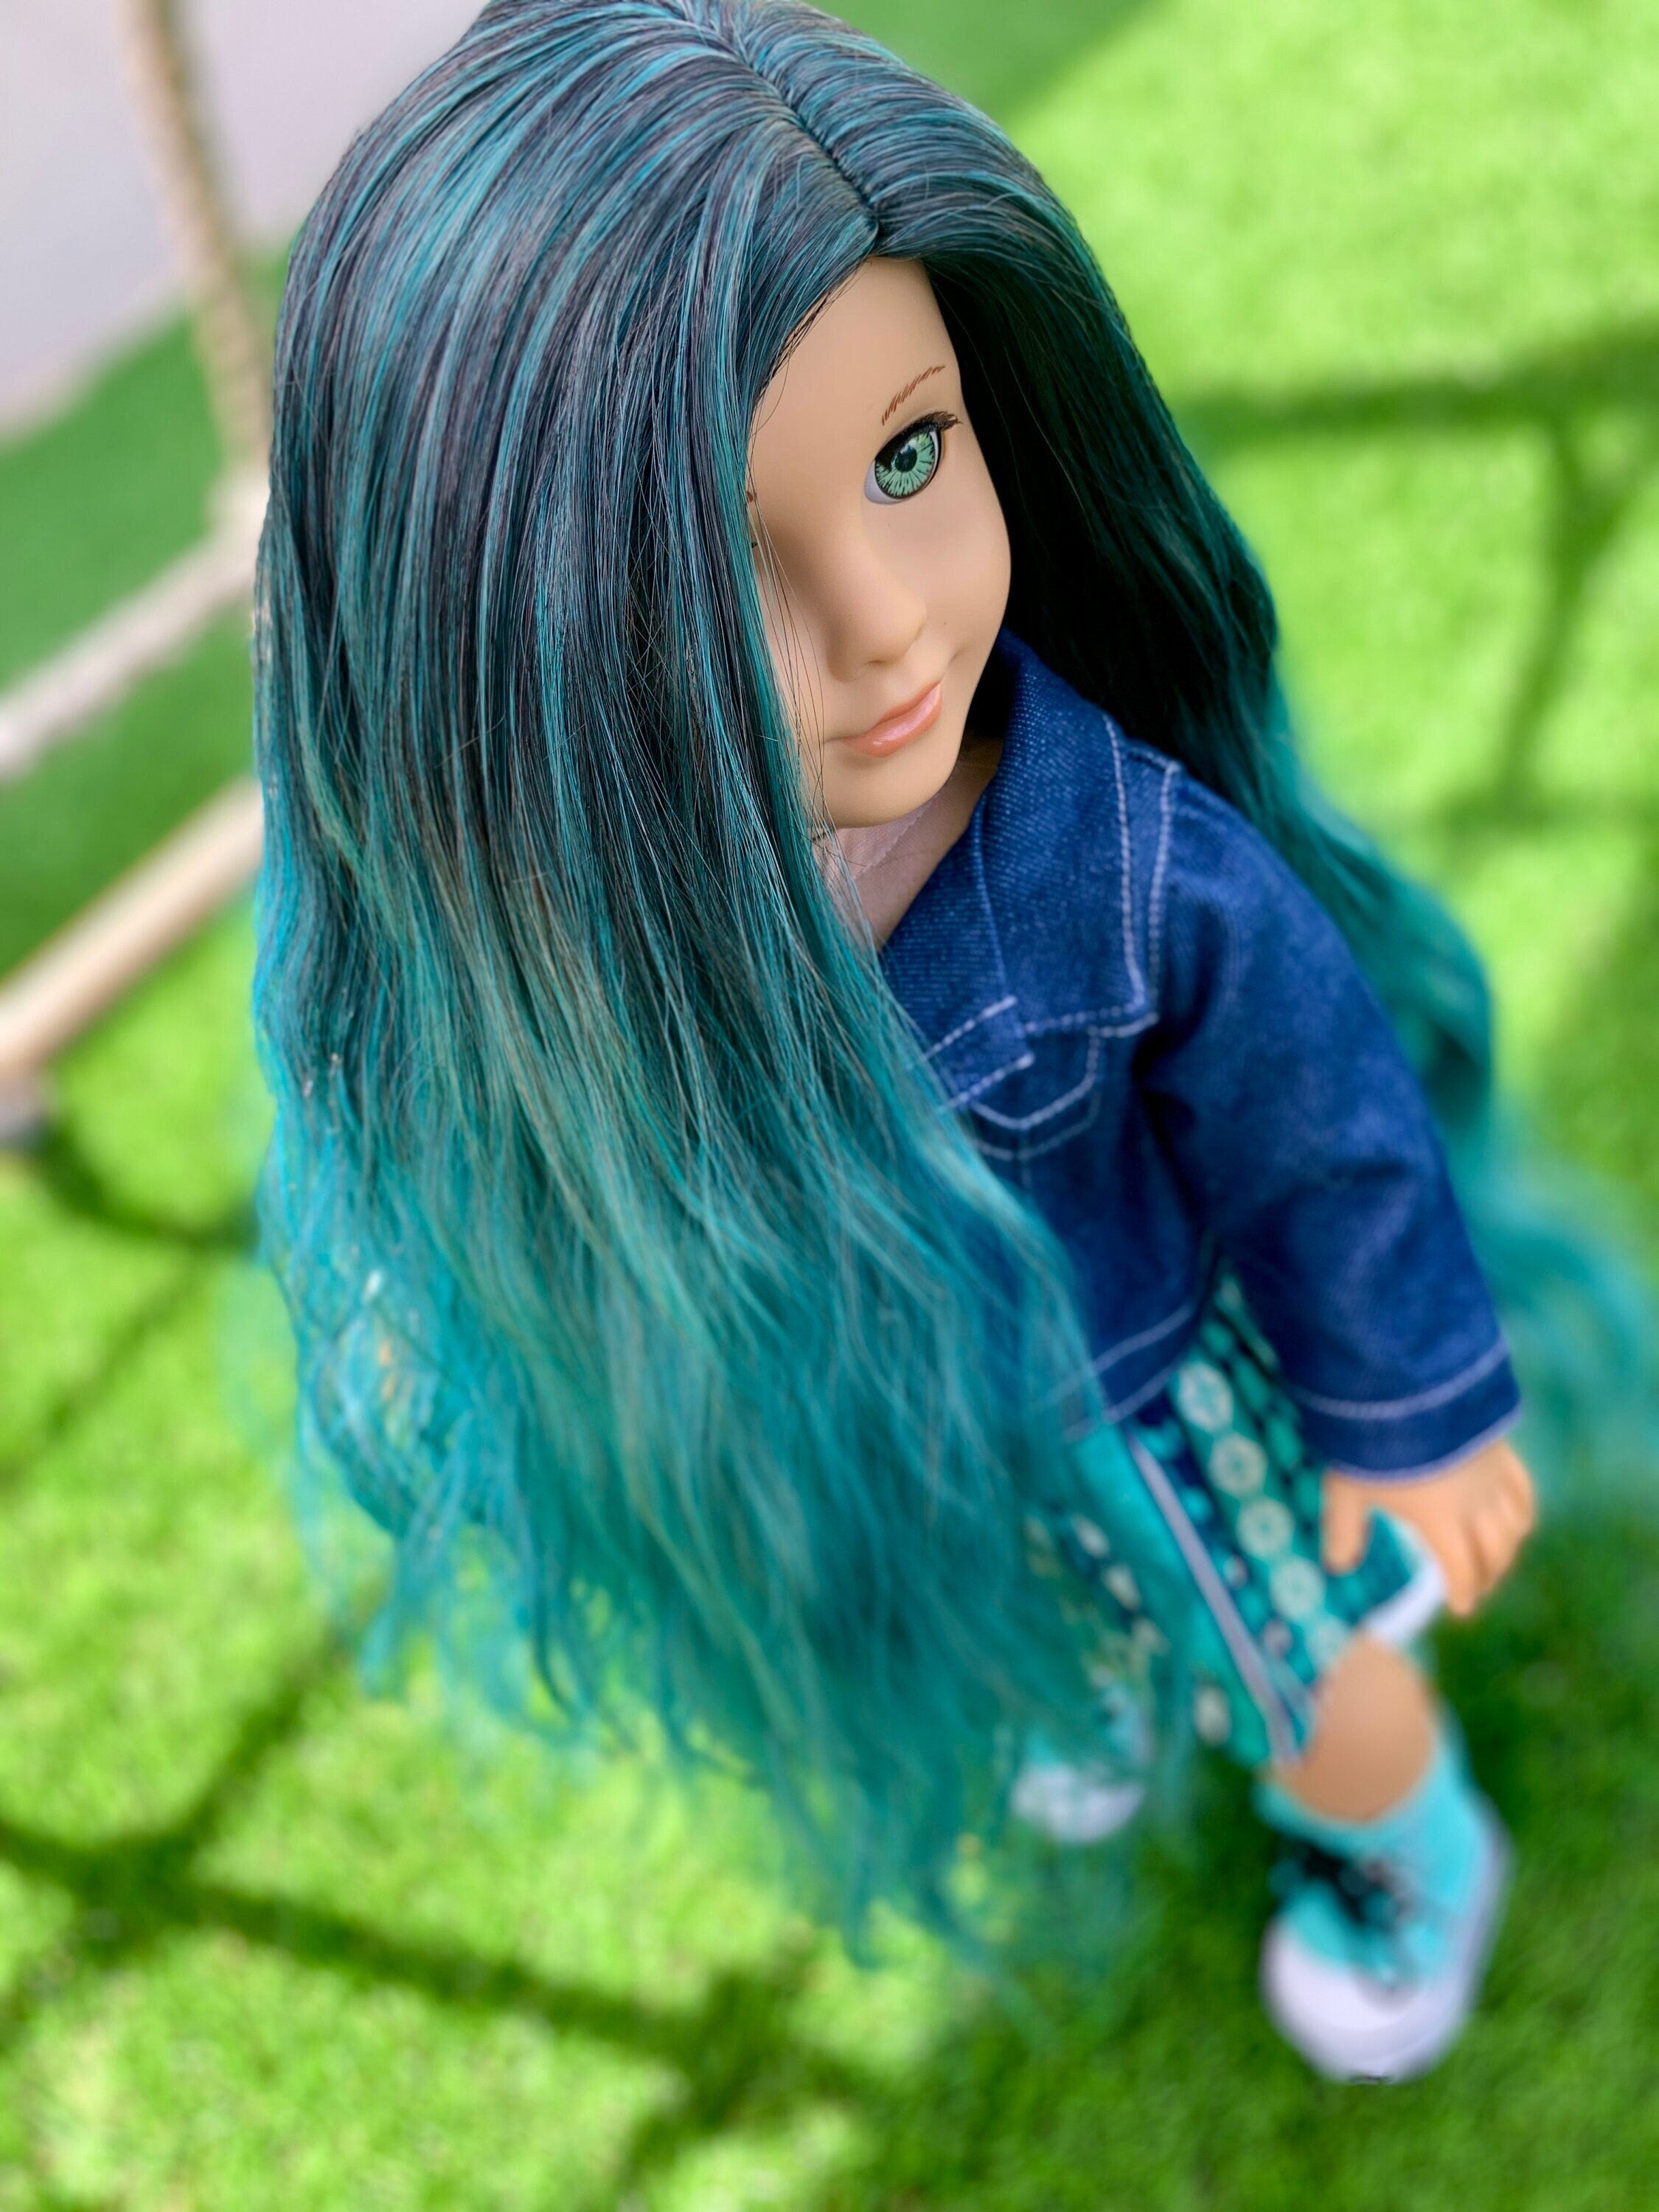 Custom DYED OMBRE Doll Wig for 18" American Girl Doll Heat Safe Tangle Resistant - fits 10-11" head size of all 18" dolls teal mermaid ombre